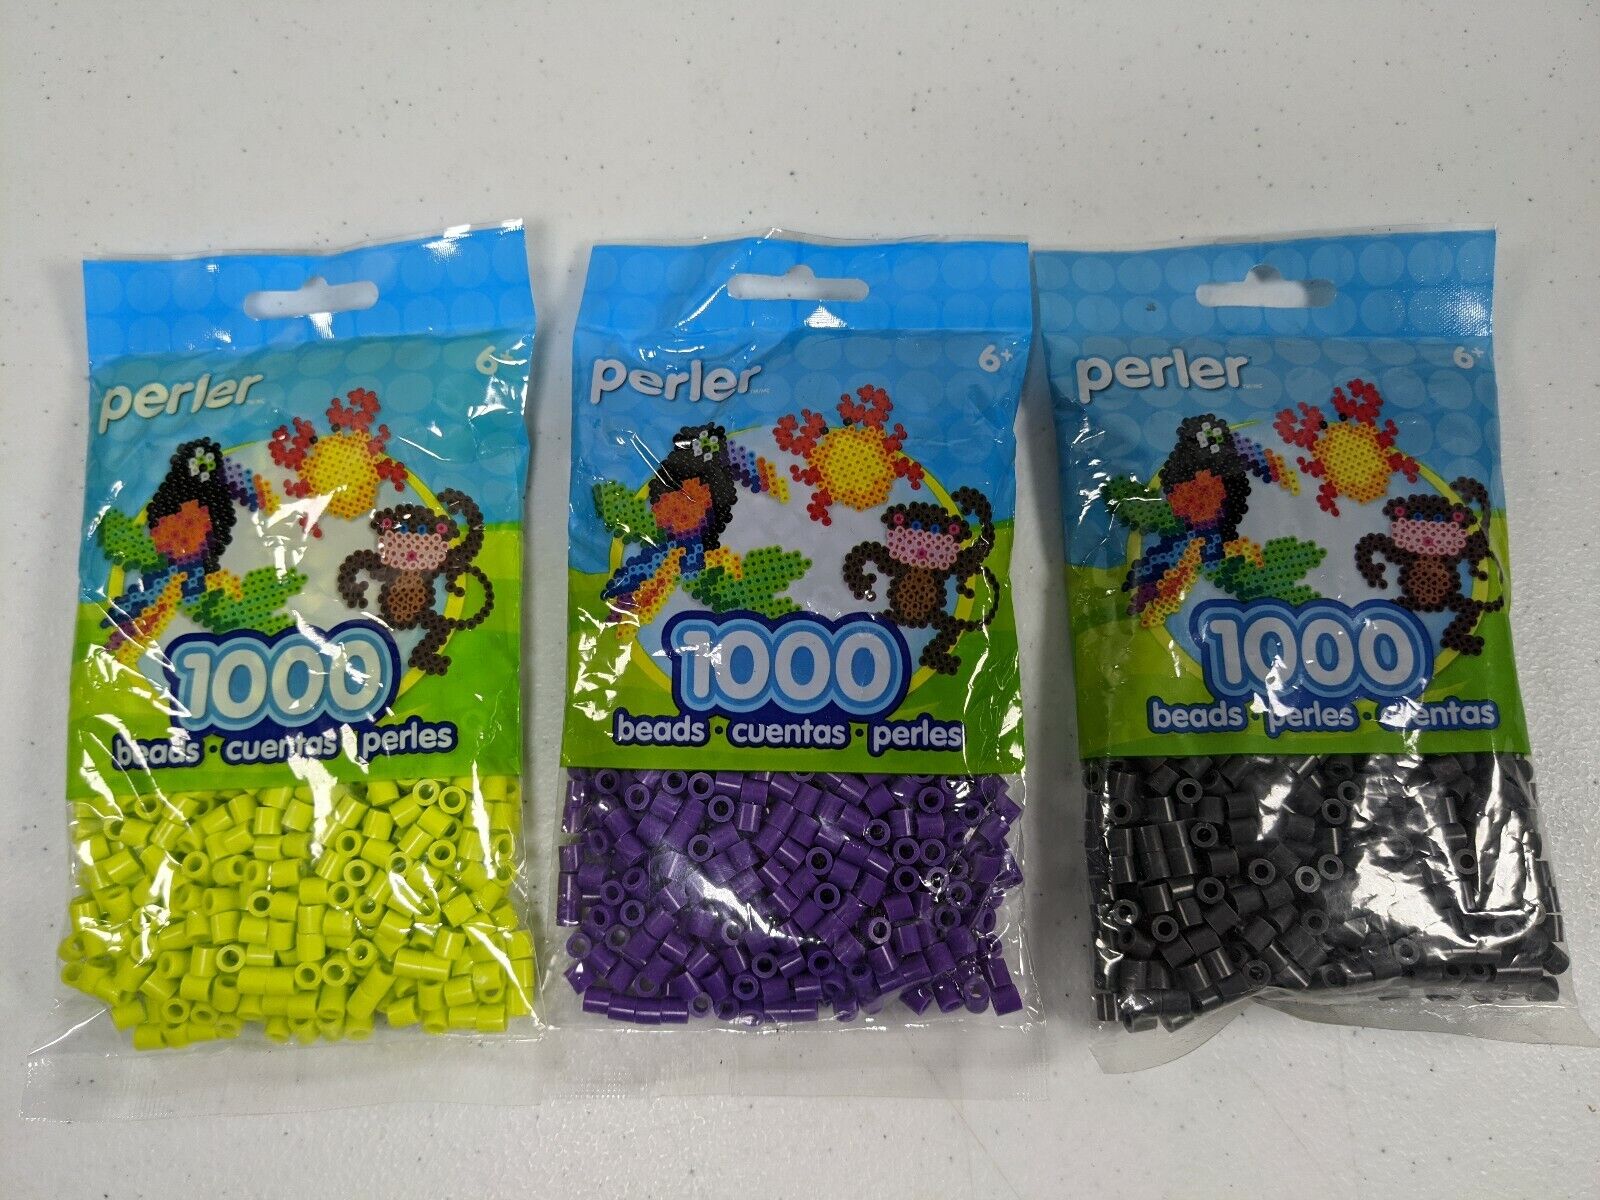 Get 1000 Prickly Pear Perler Beads - Great Selection & Prices